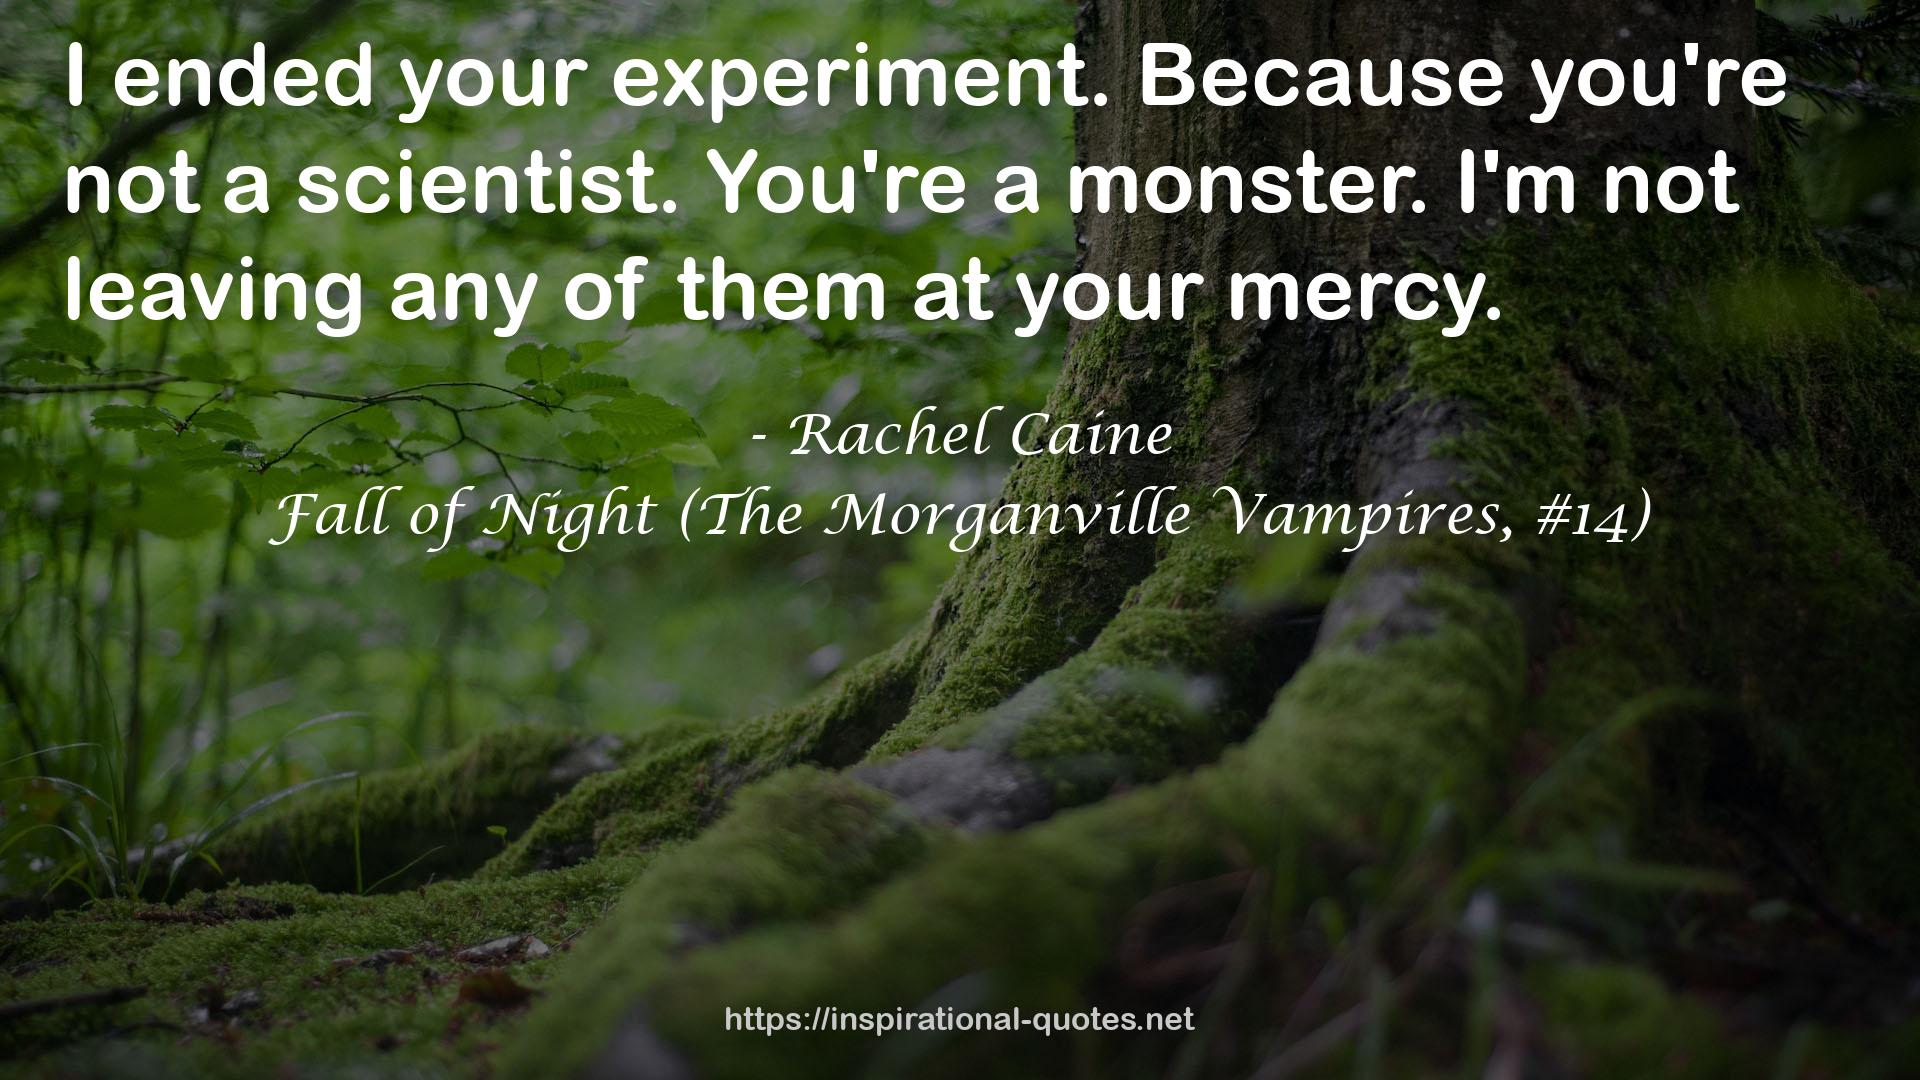 Fall of Night (The Morganville Vampires, #14) QUOTES